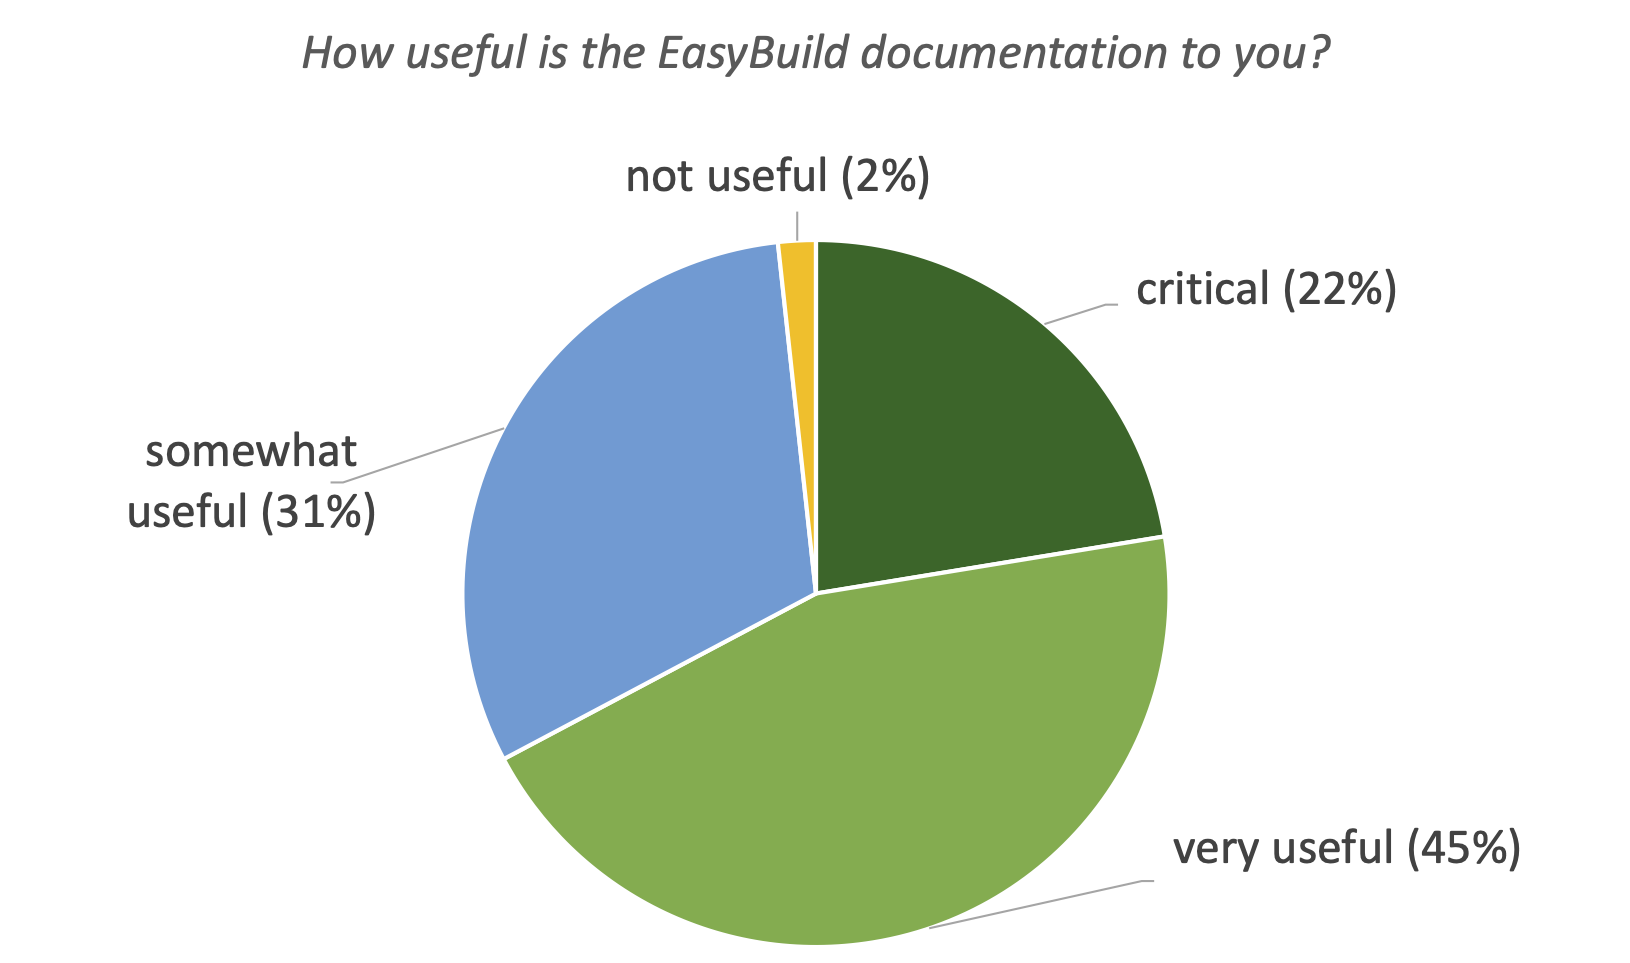 38. How useful is the EasyBuild documentation to you?